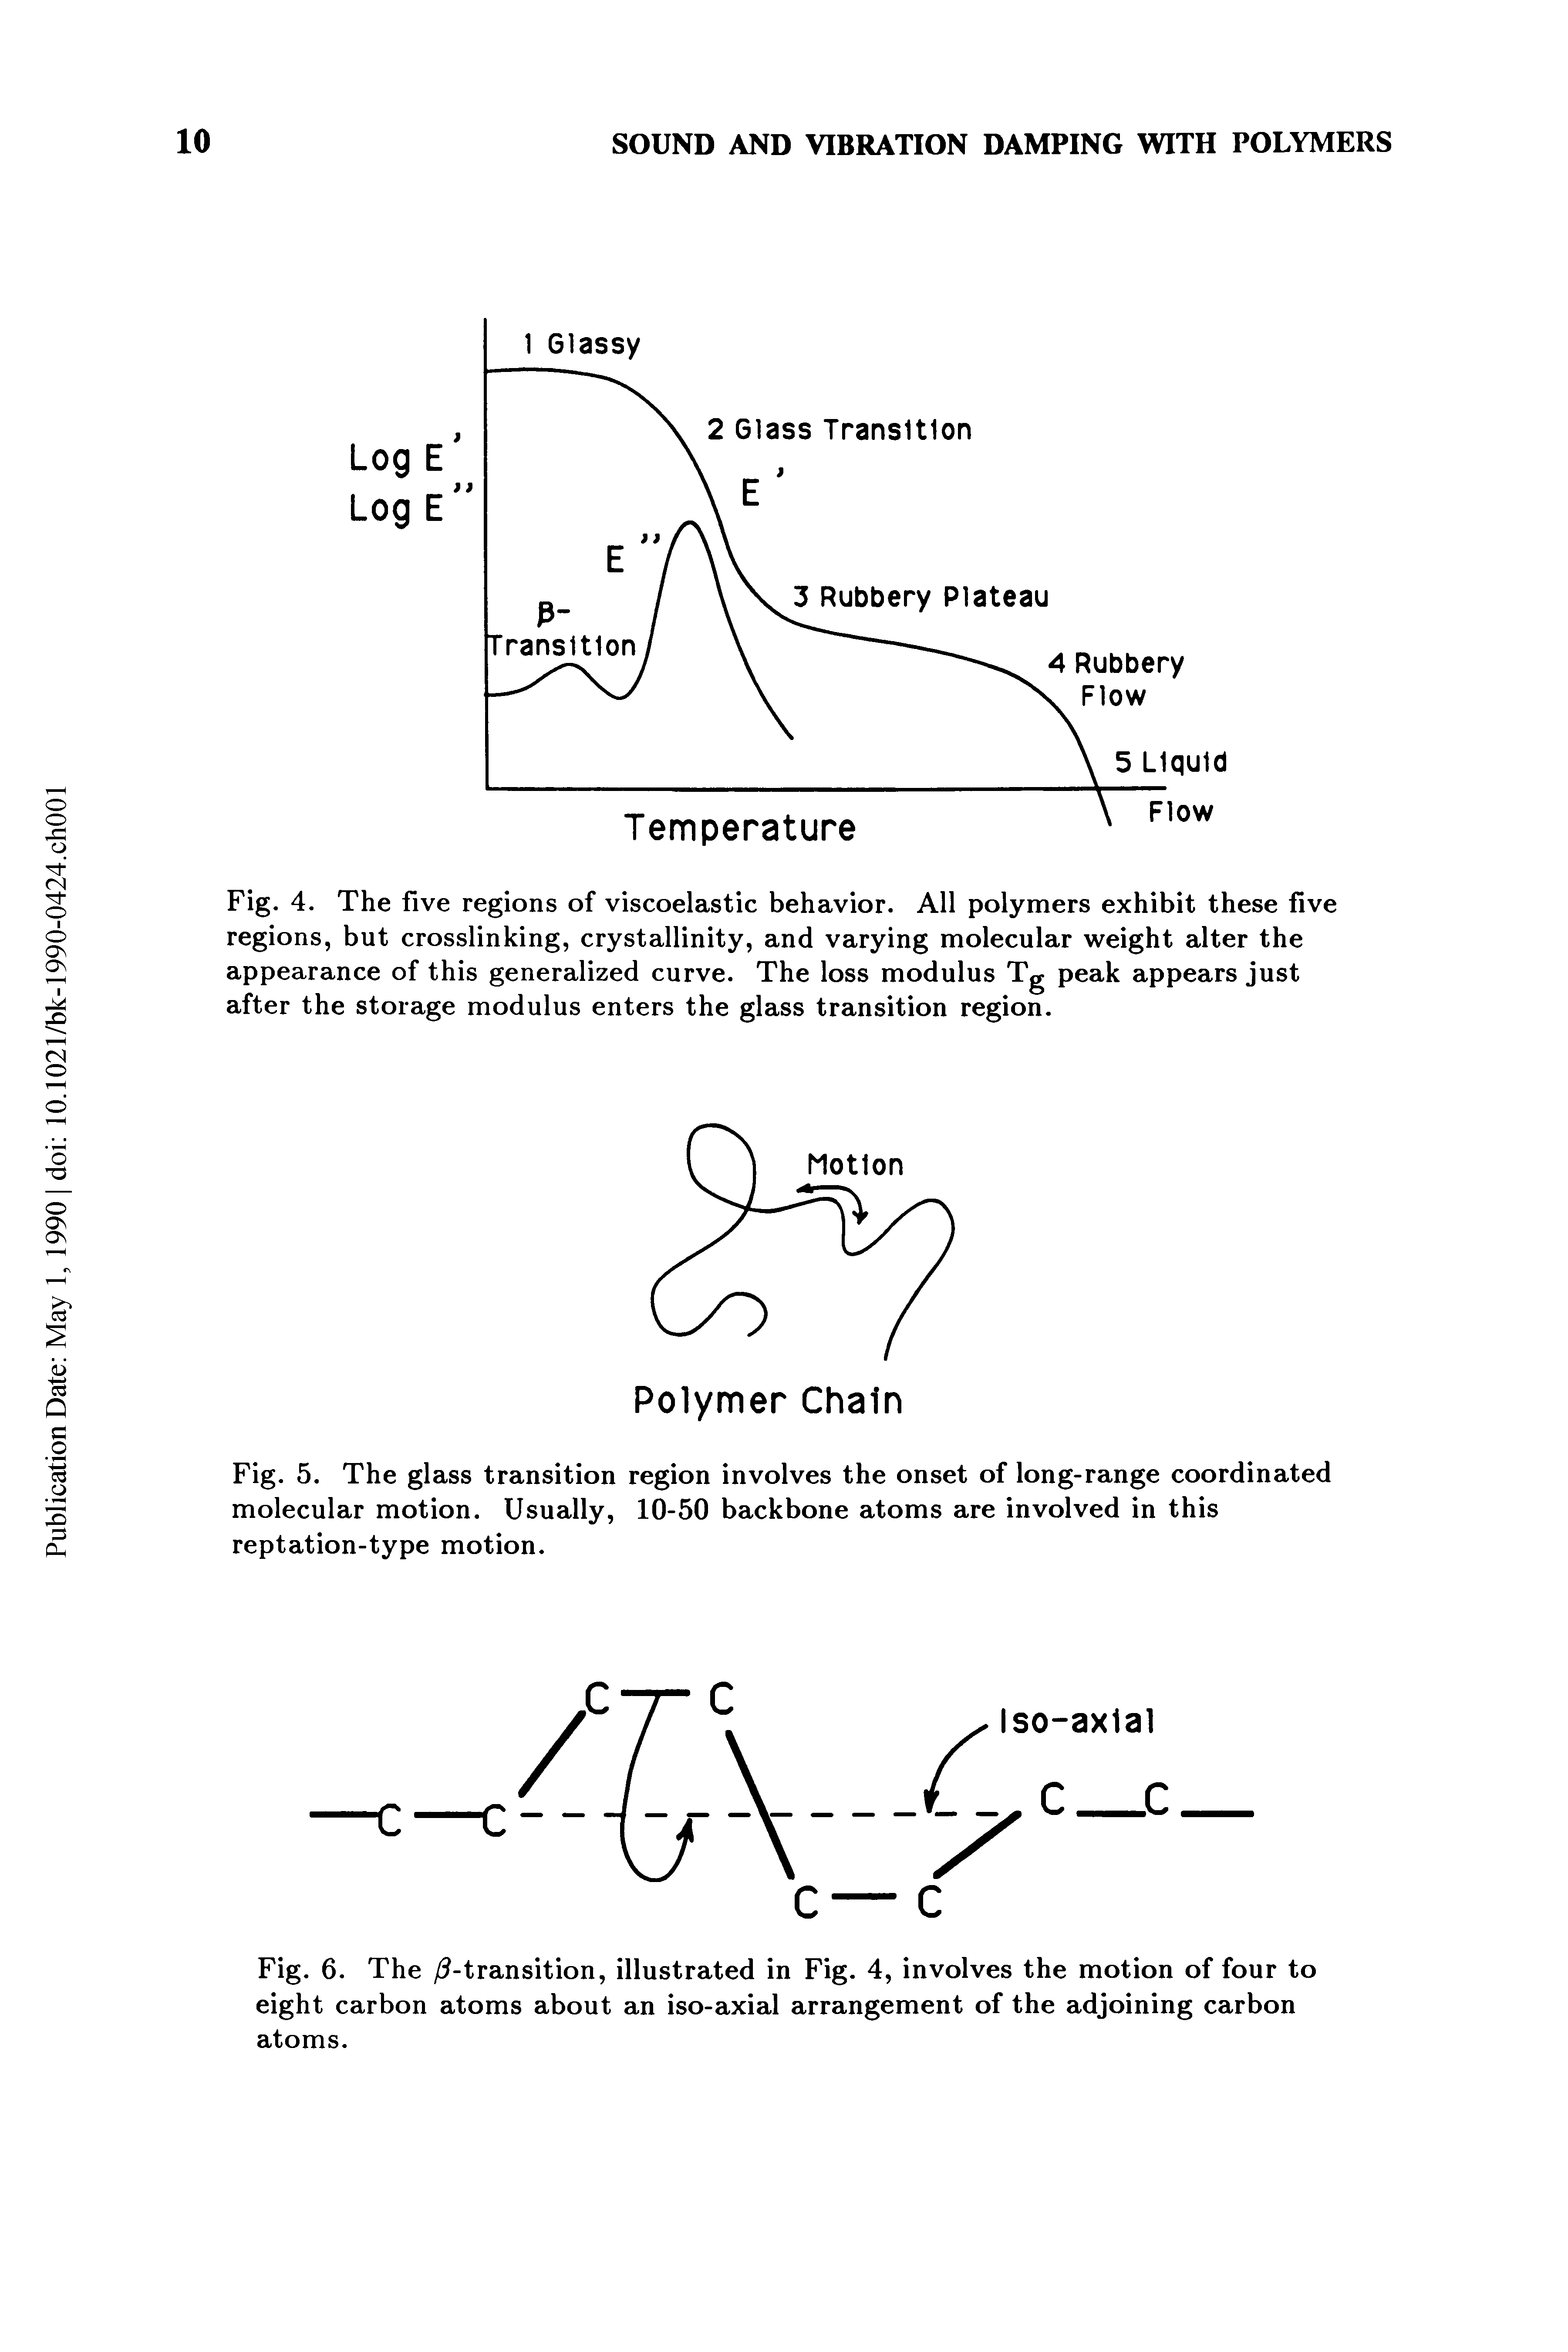 Fig. 4. The five regions of viscoelastic behavior. All polymers exhibit these five regions, but crosslinking, crystallinity, and varying molecular weight alter the appearance of this generalized curve. The loss modulus Tg peak appears just after the storage modulus enters the glass transition region.